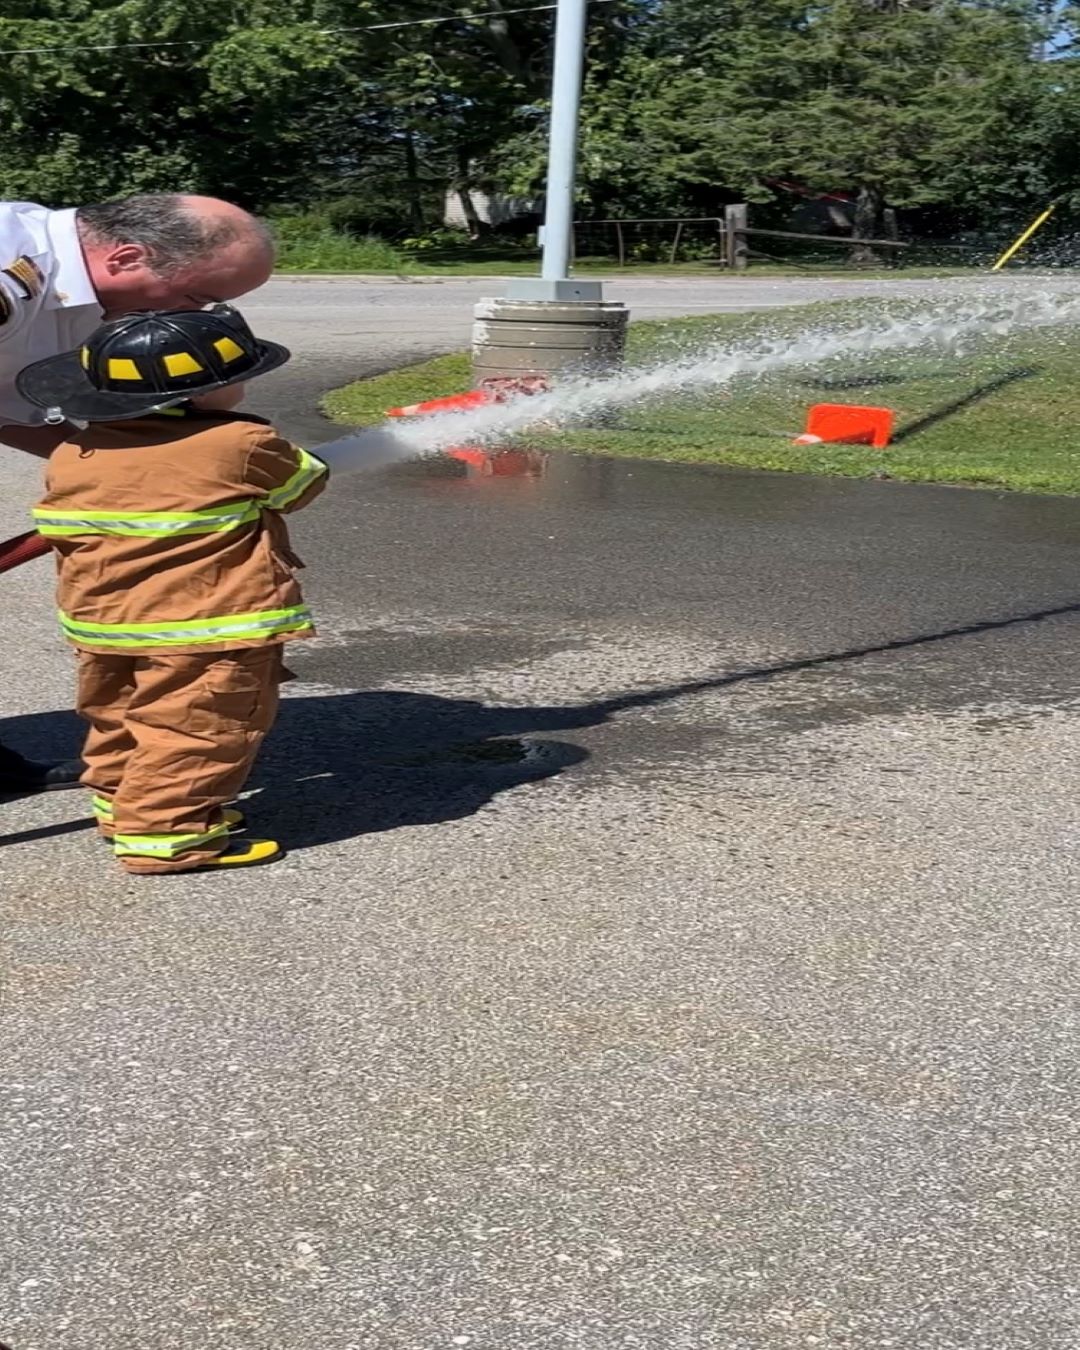 Fire Chief Rob Bowman, Connor (fire chief for the day) using a fire hose